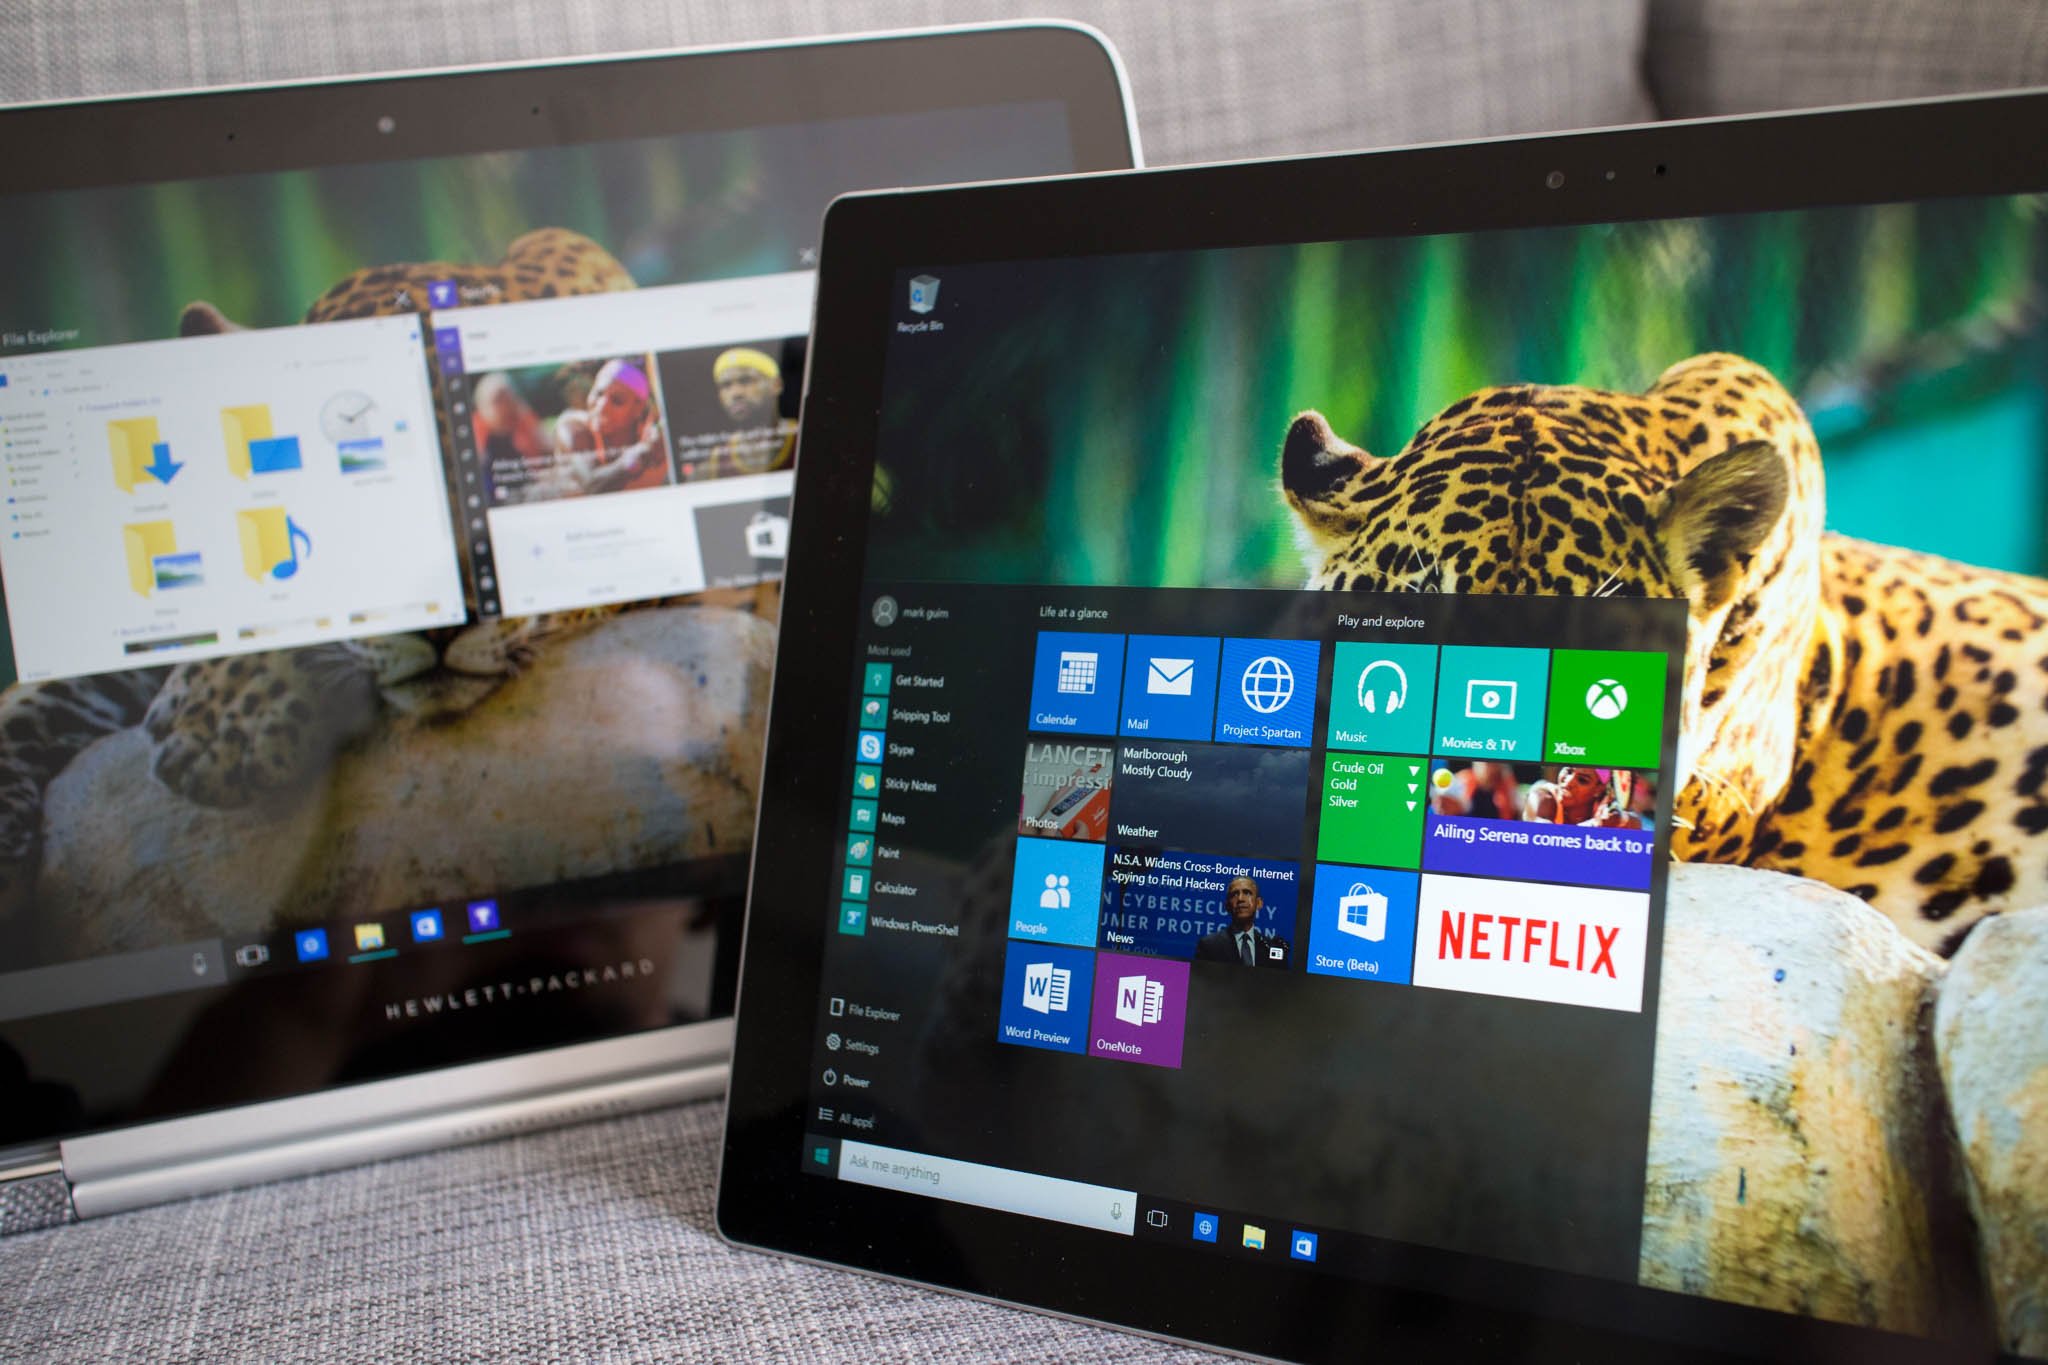 Windows 10 update packs fix for AMD boot issues